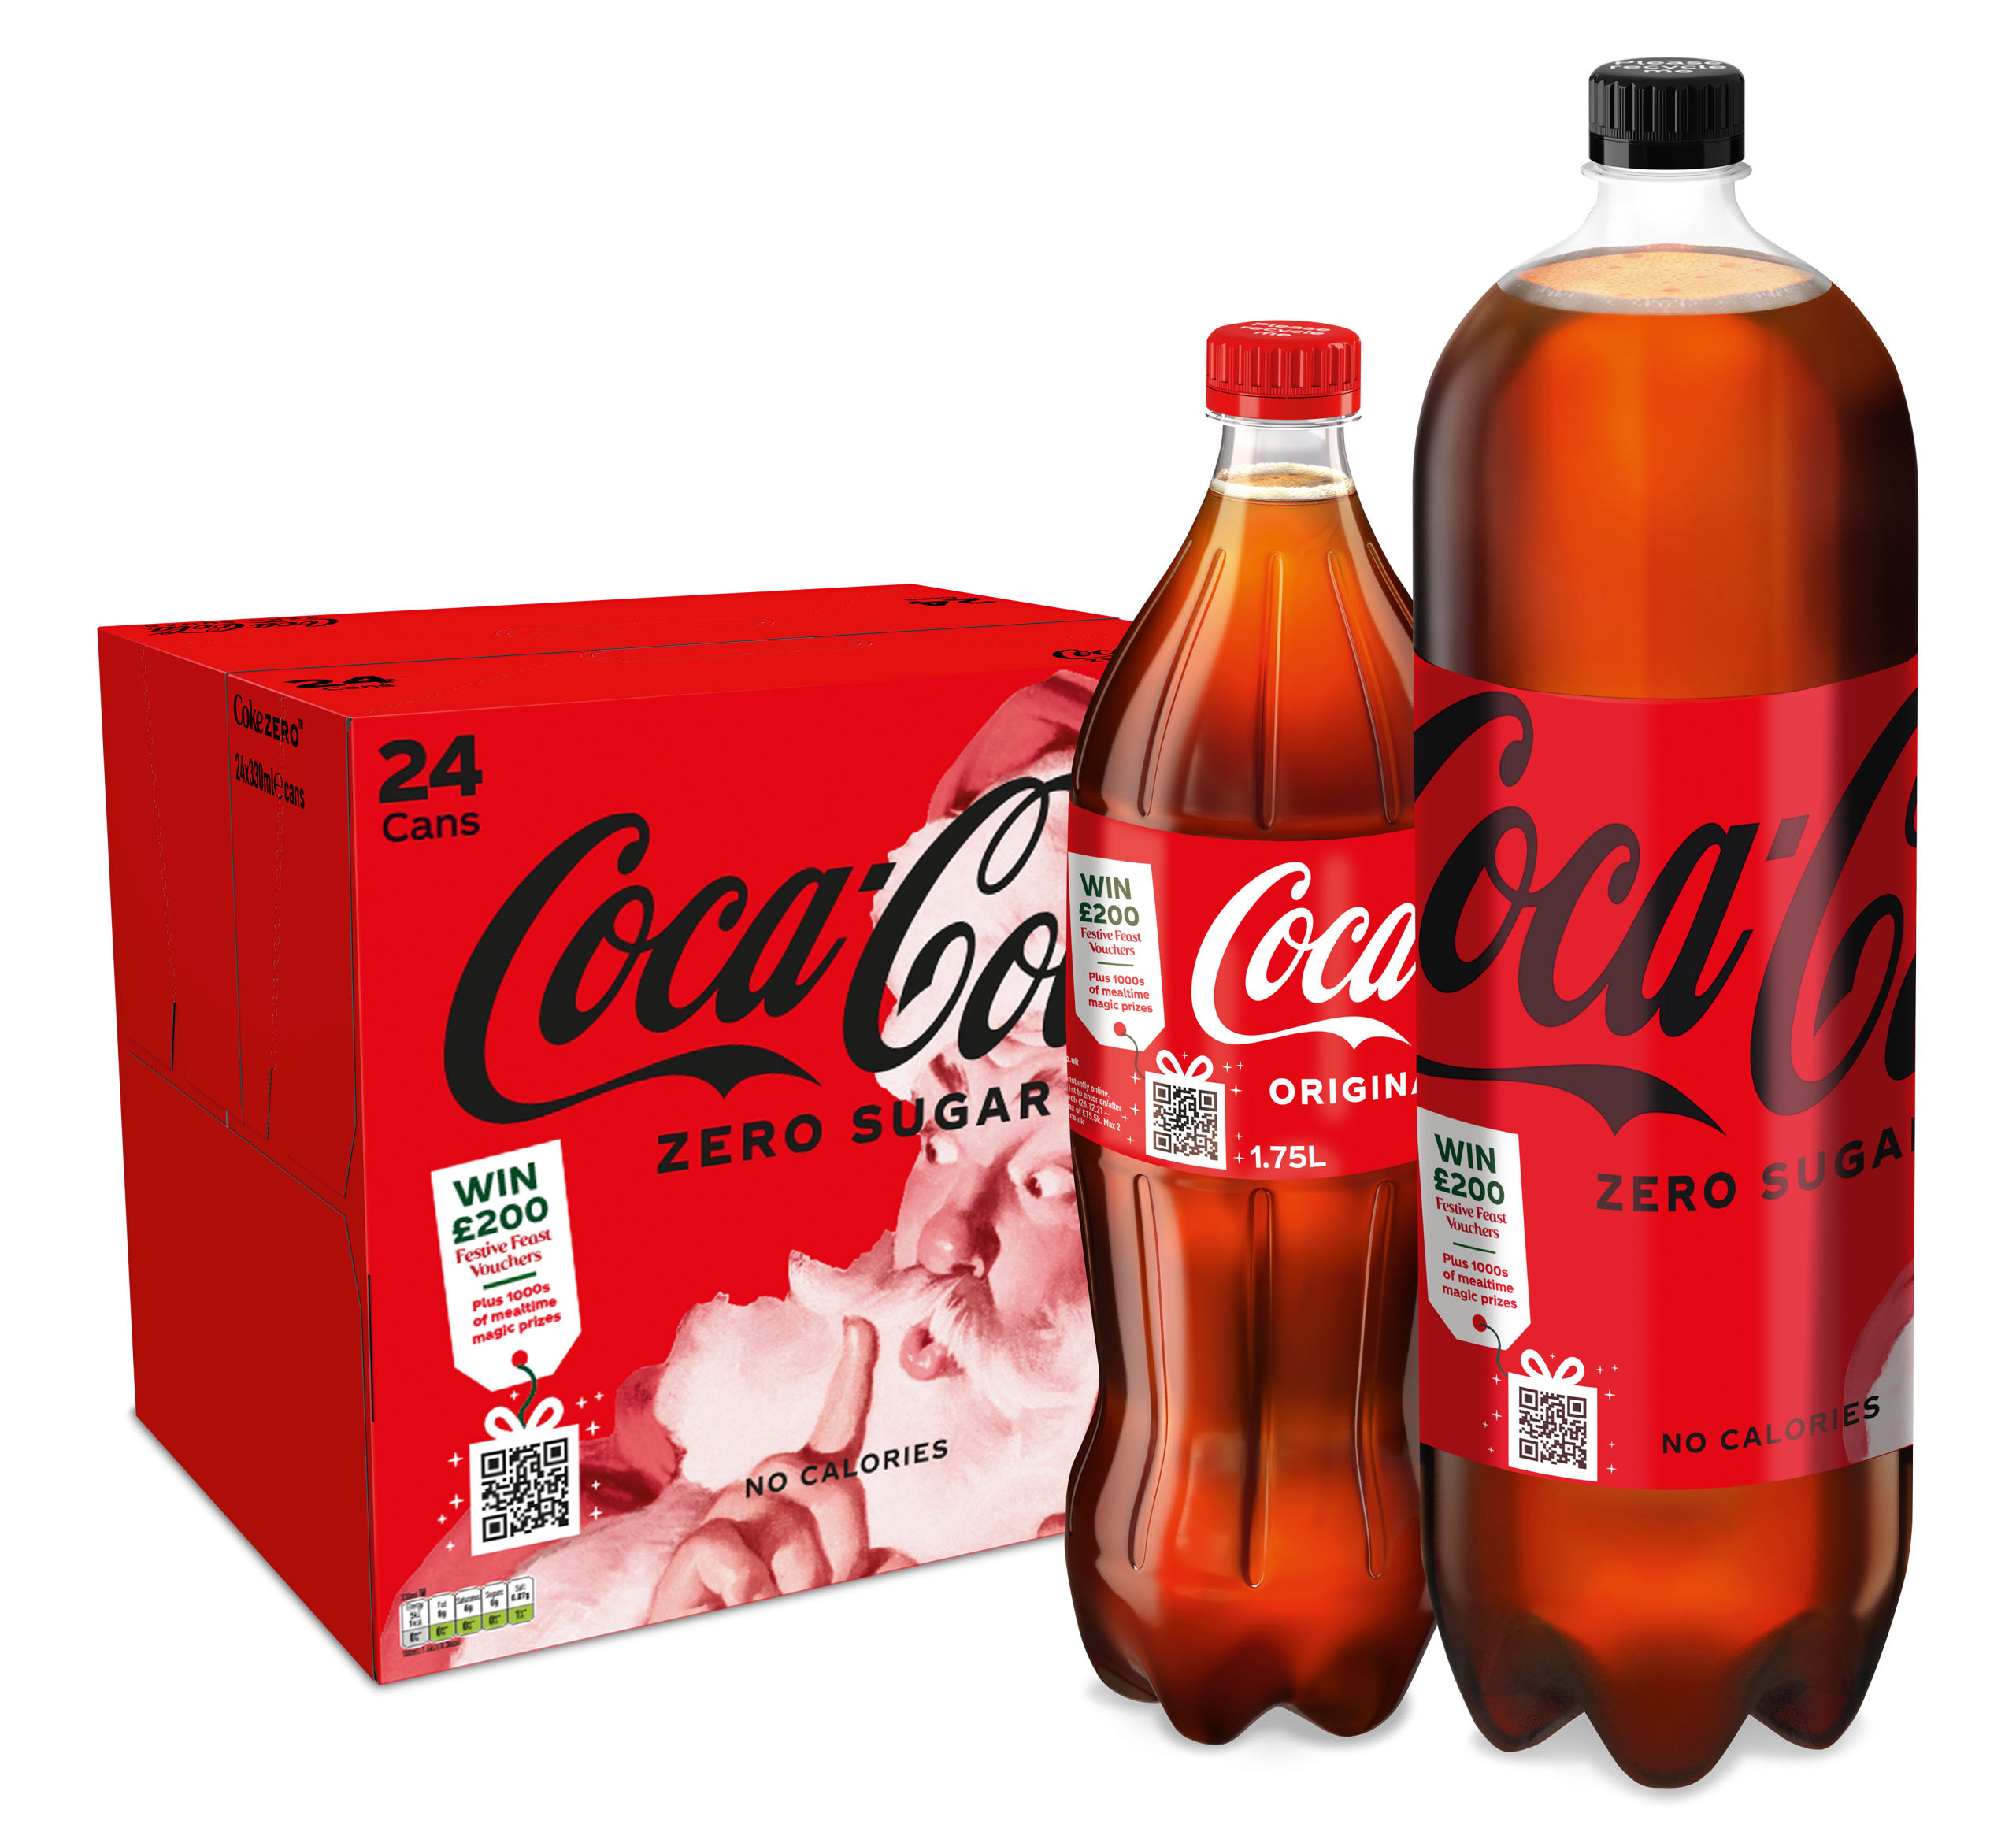 Coca-Cola brings cheer to festive feasts with Christmas on-pack promotion